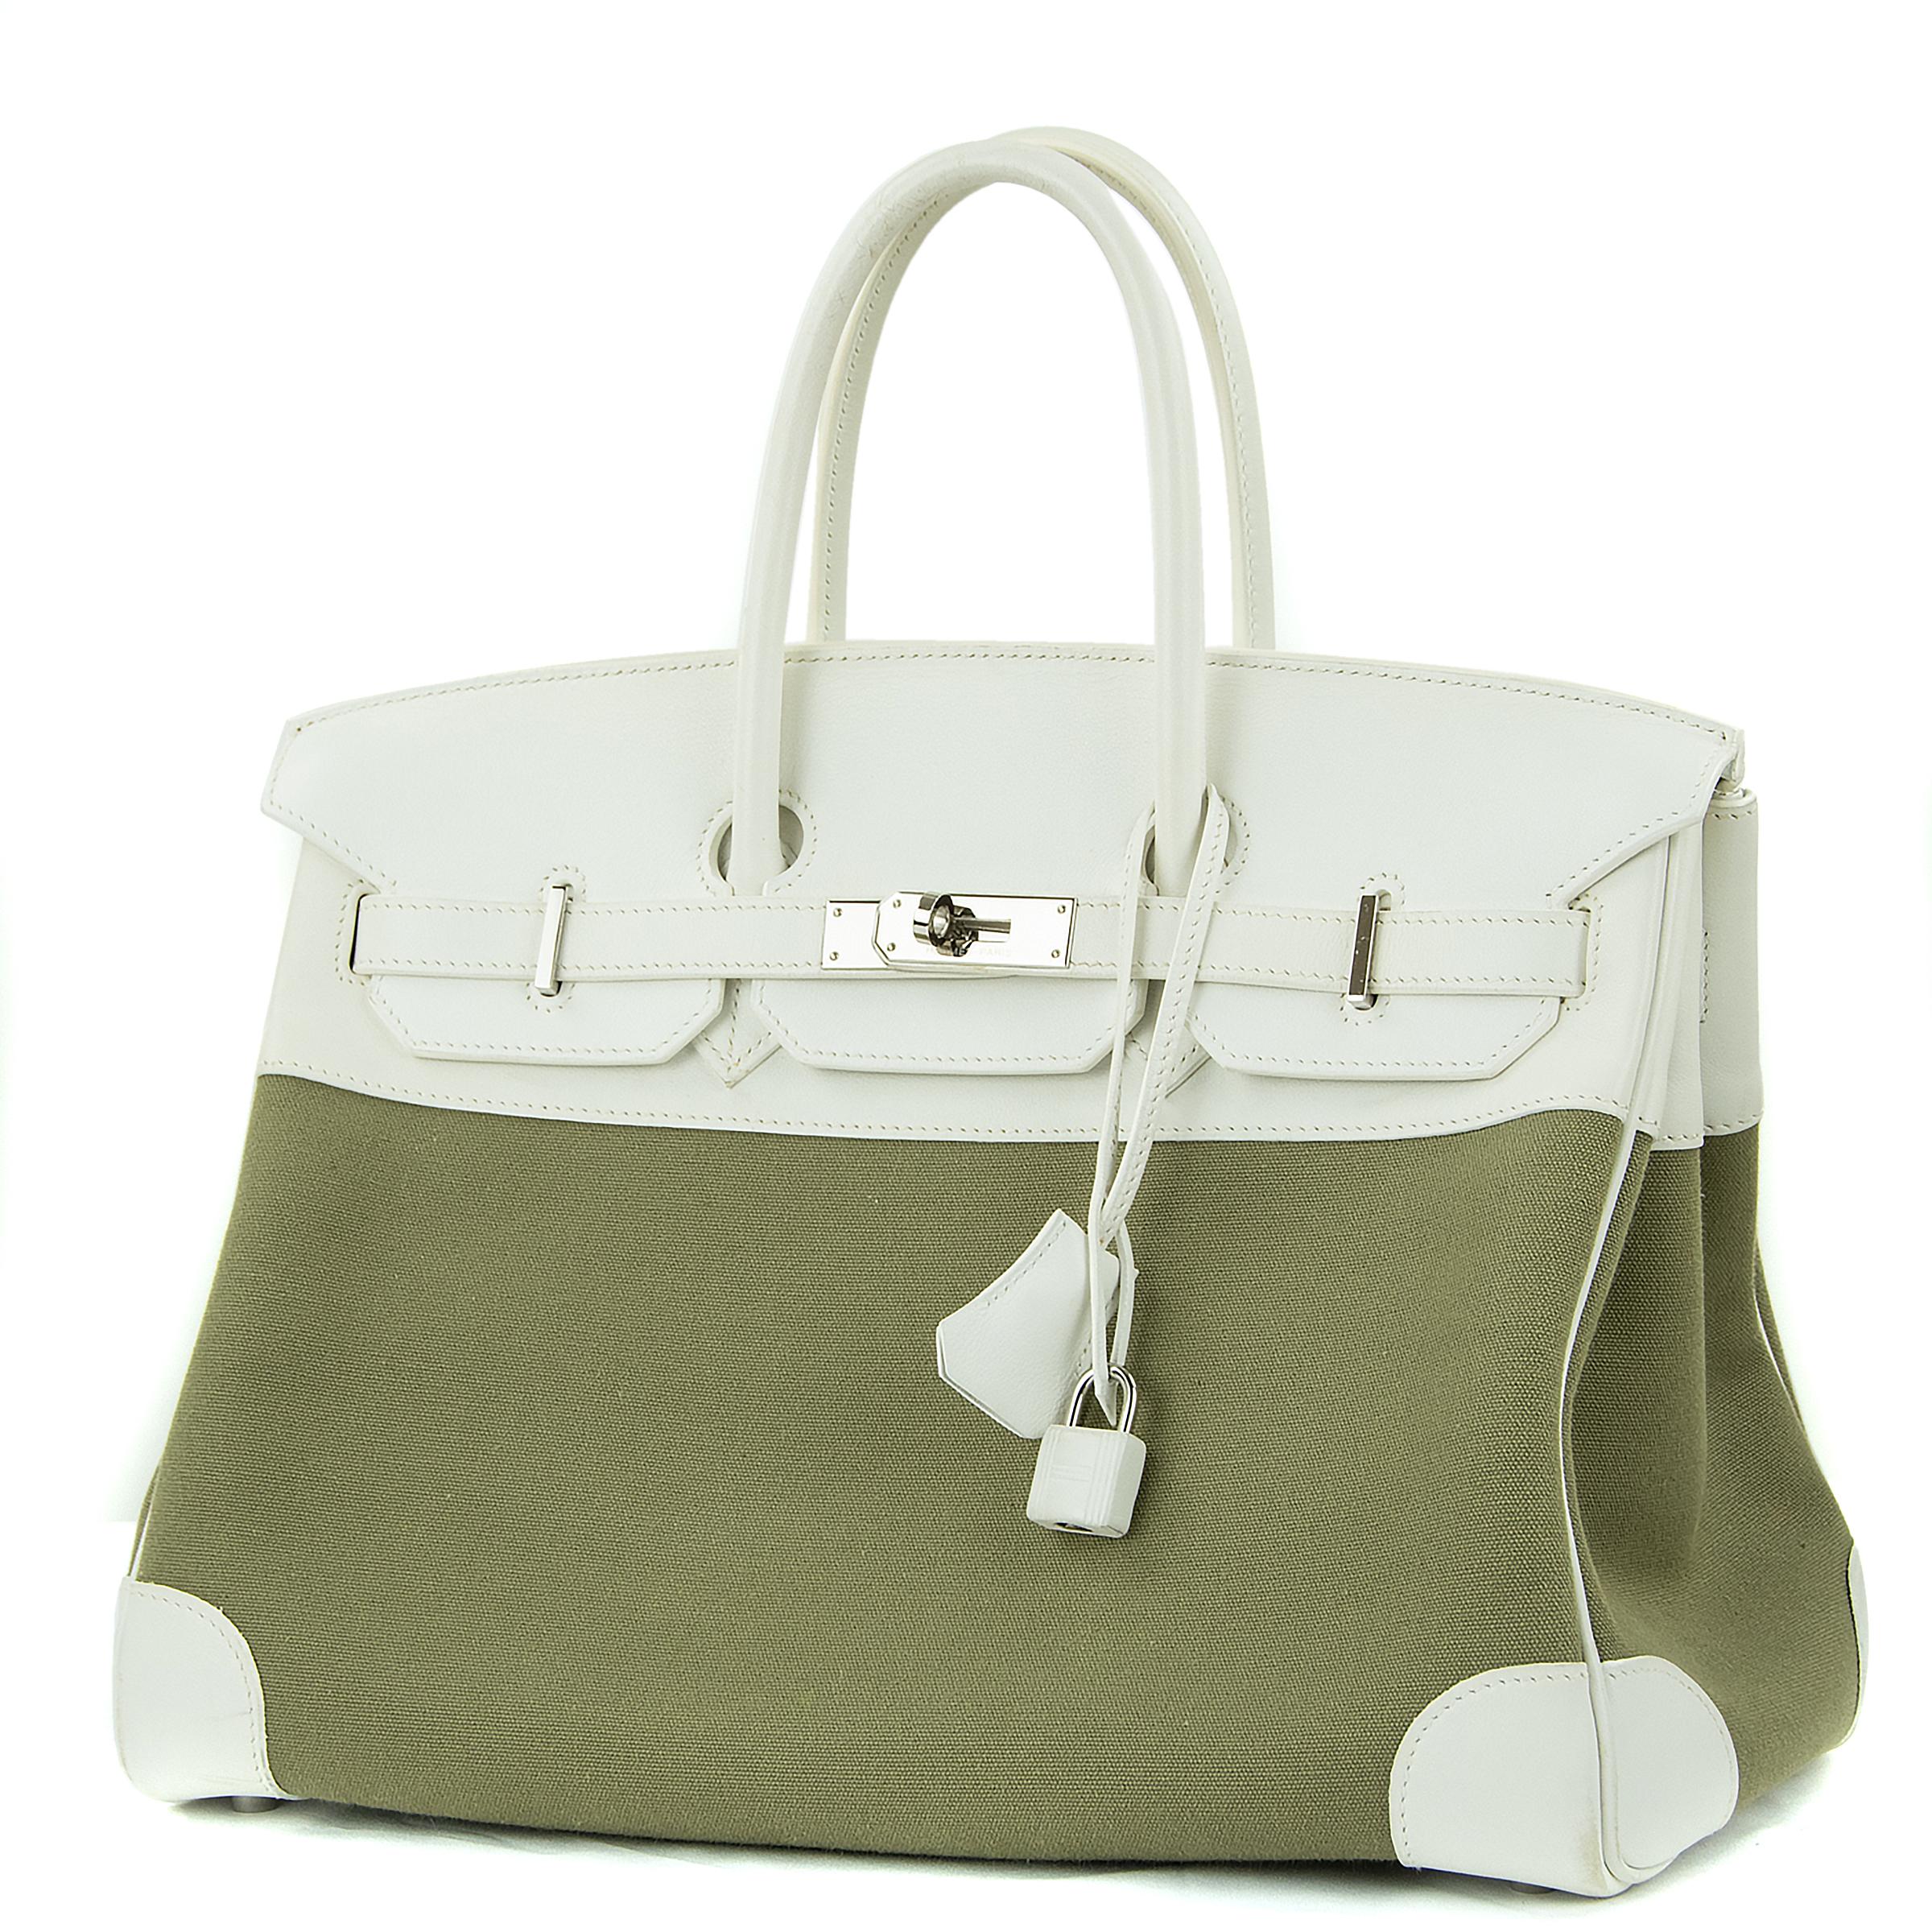 Brown Hermes Birkin Bag 35cm Olive Toile Officier Canvas White Leather PHW (Pre Owned) For Sale